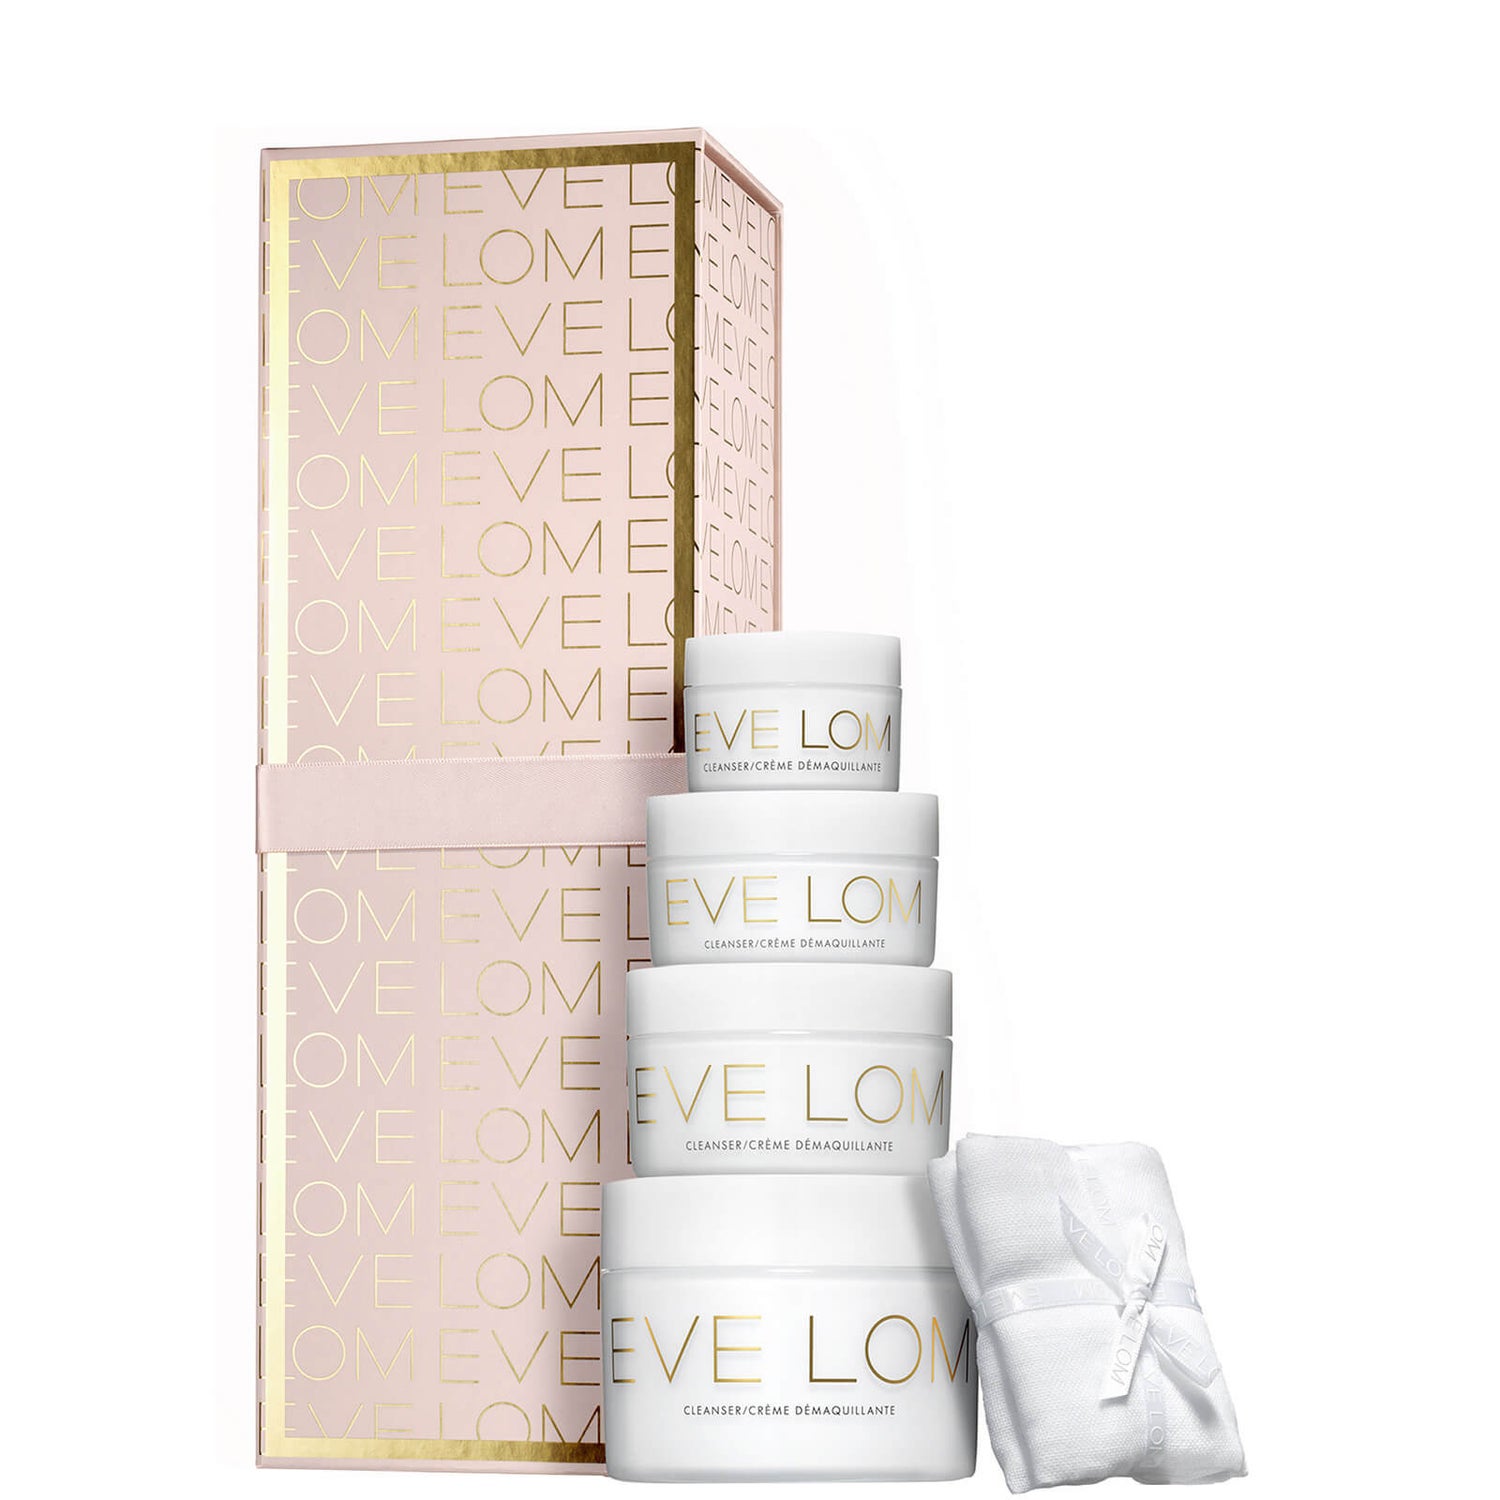 Eve Lom Decadent Cleanser Gift Set (Worth £212.00)